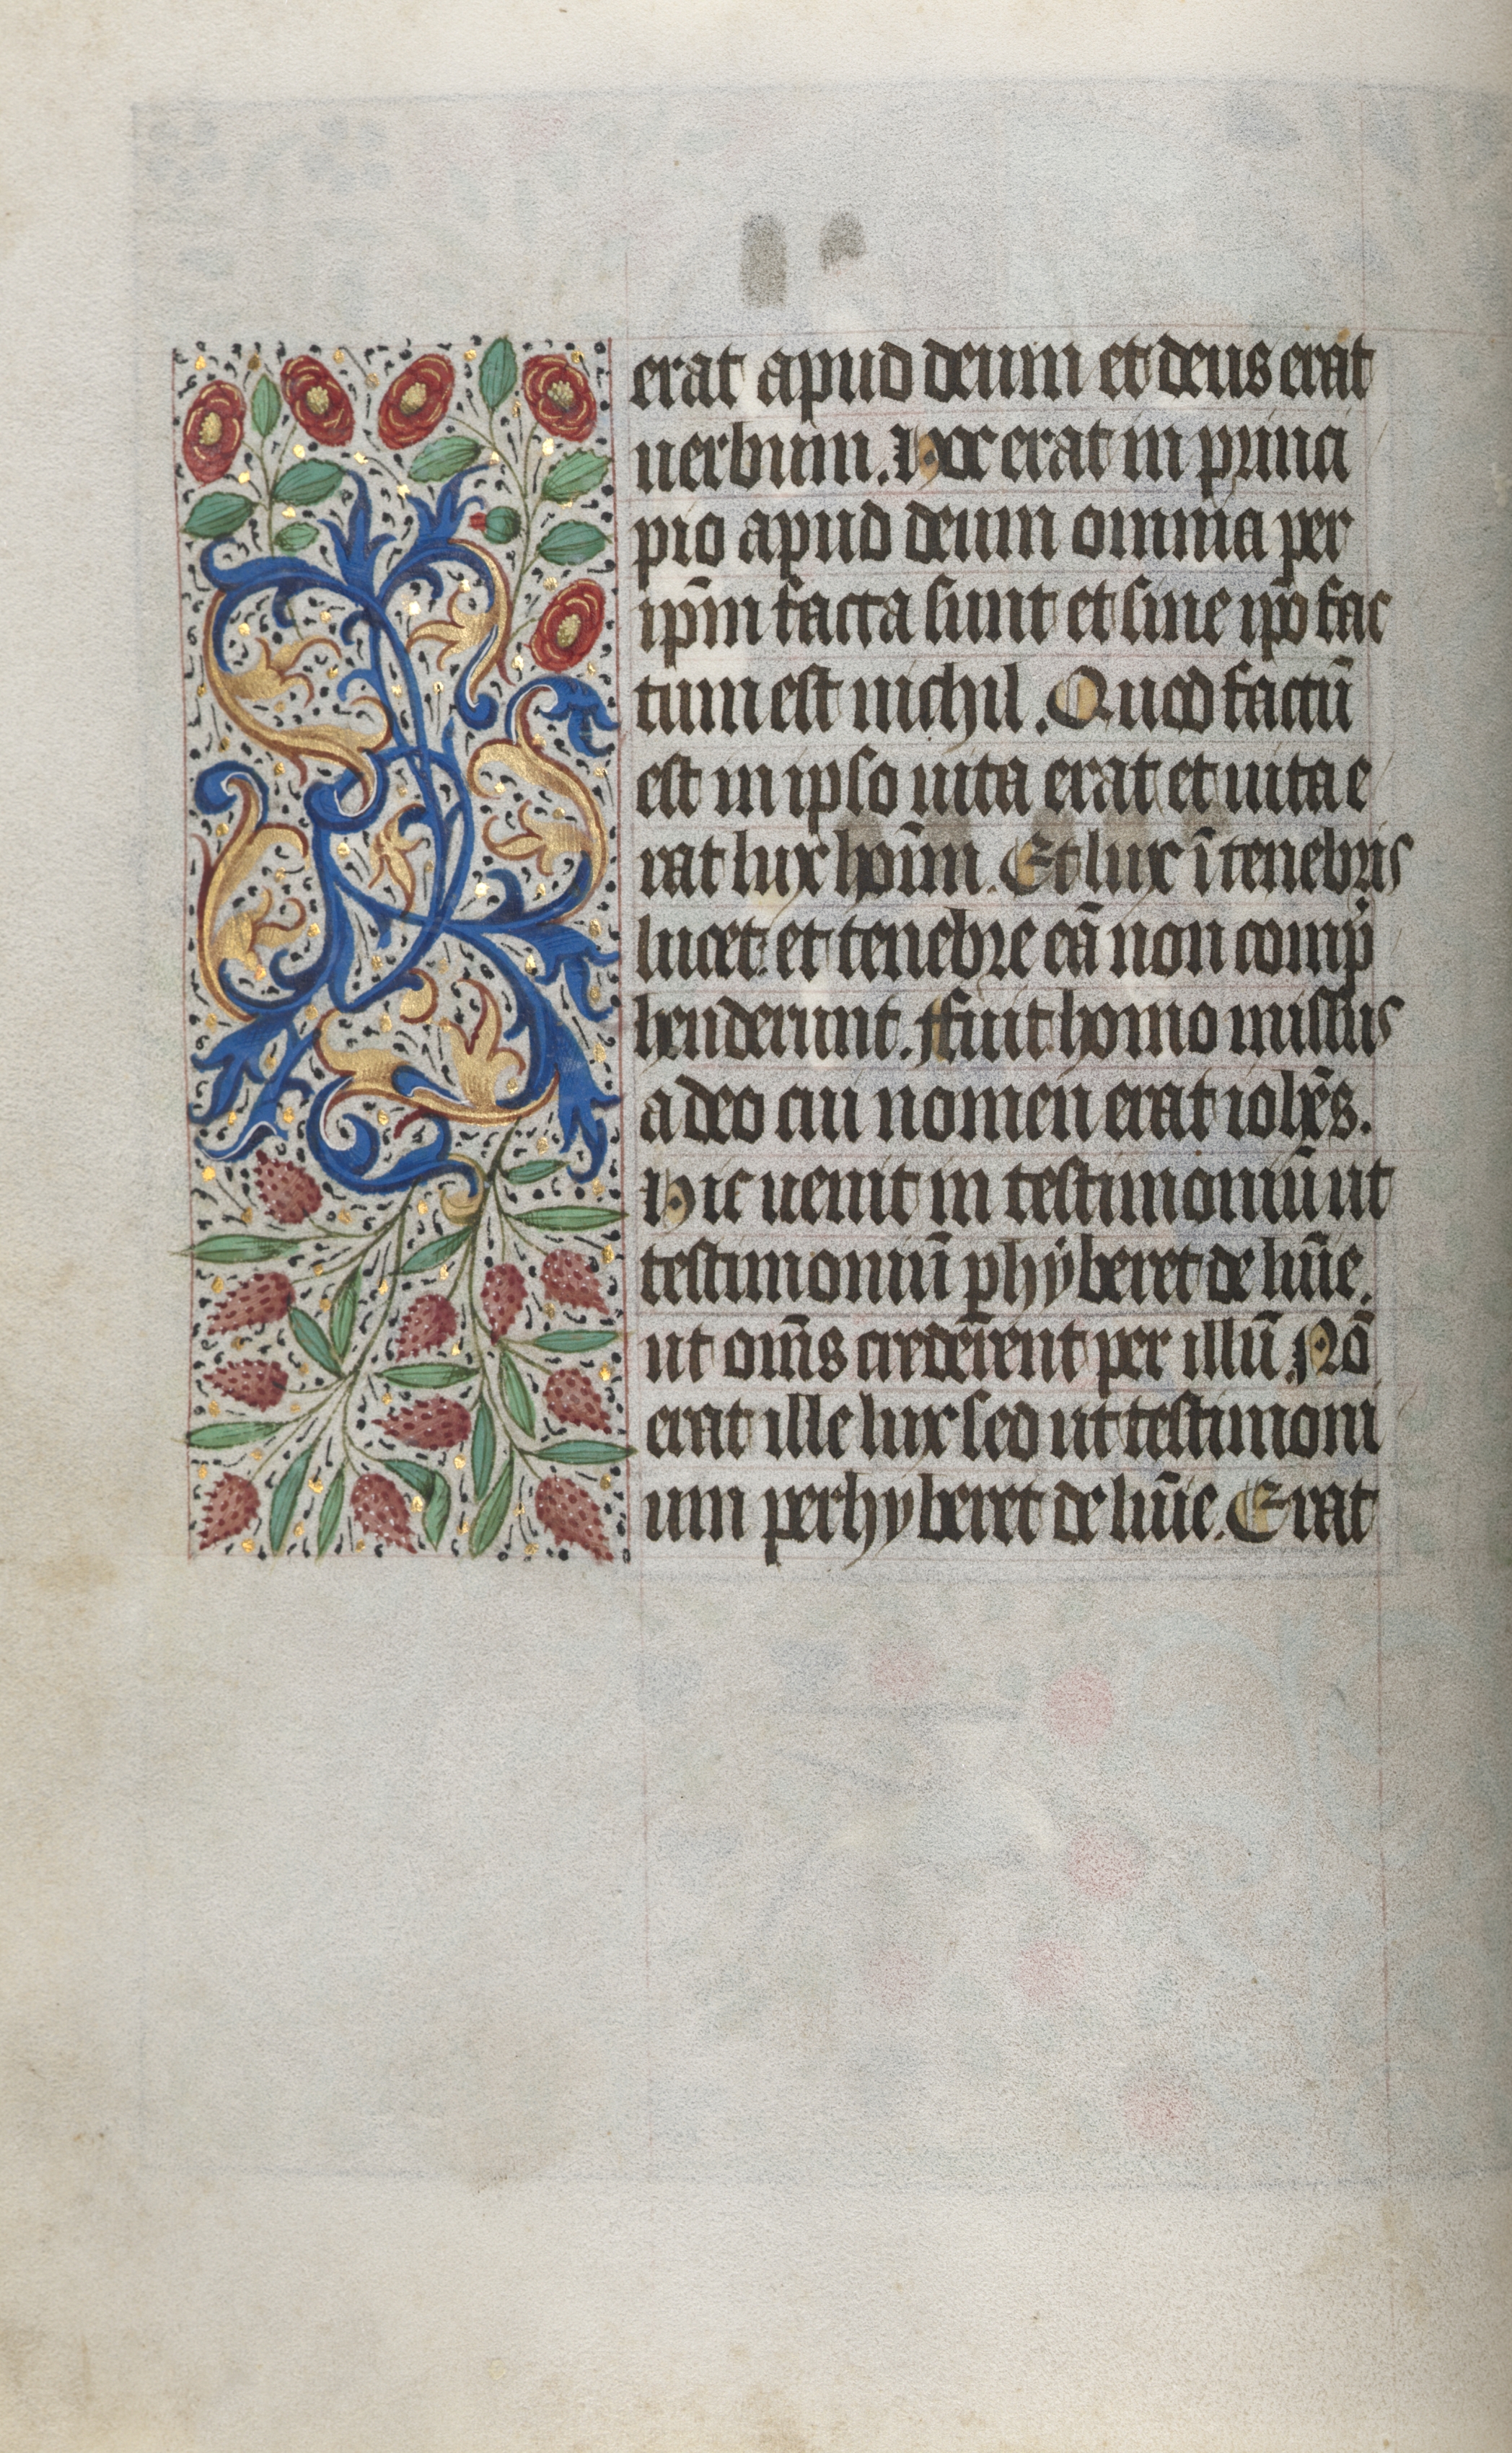 Book of Hours (Use of Rouen): fol. 13v